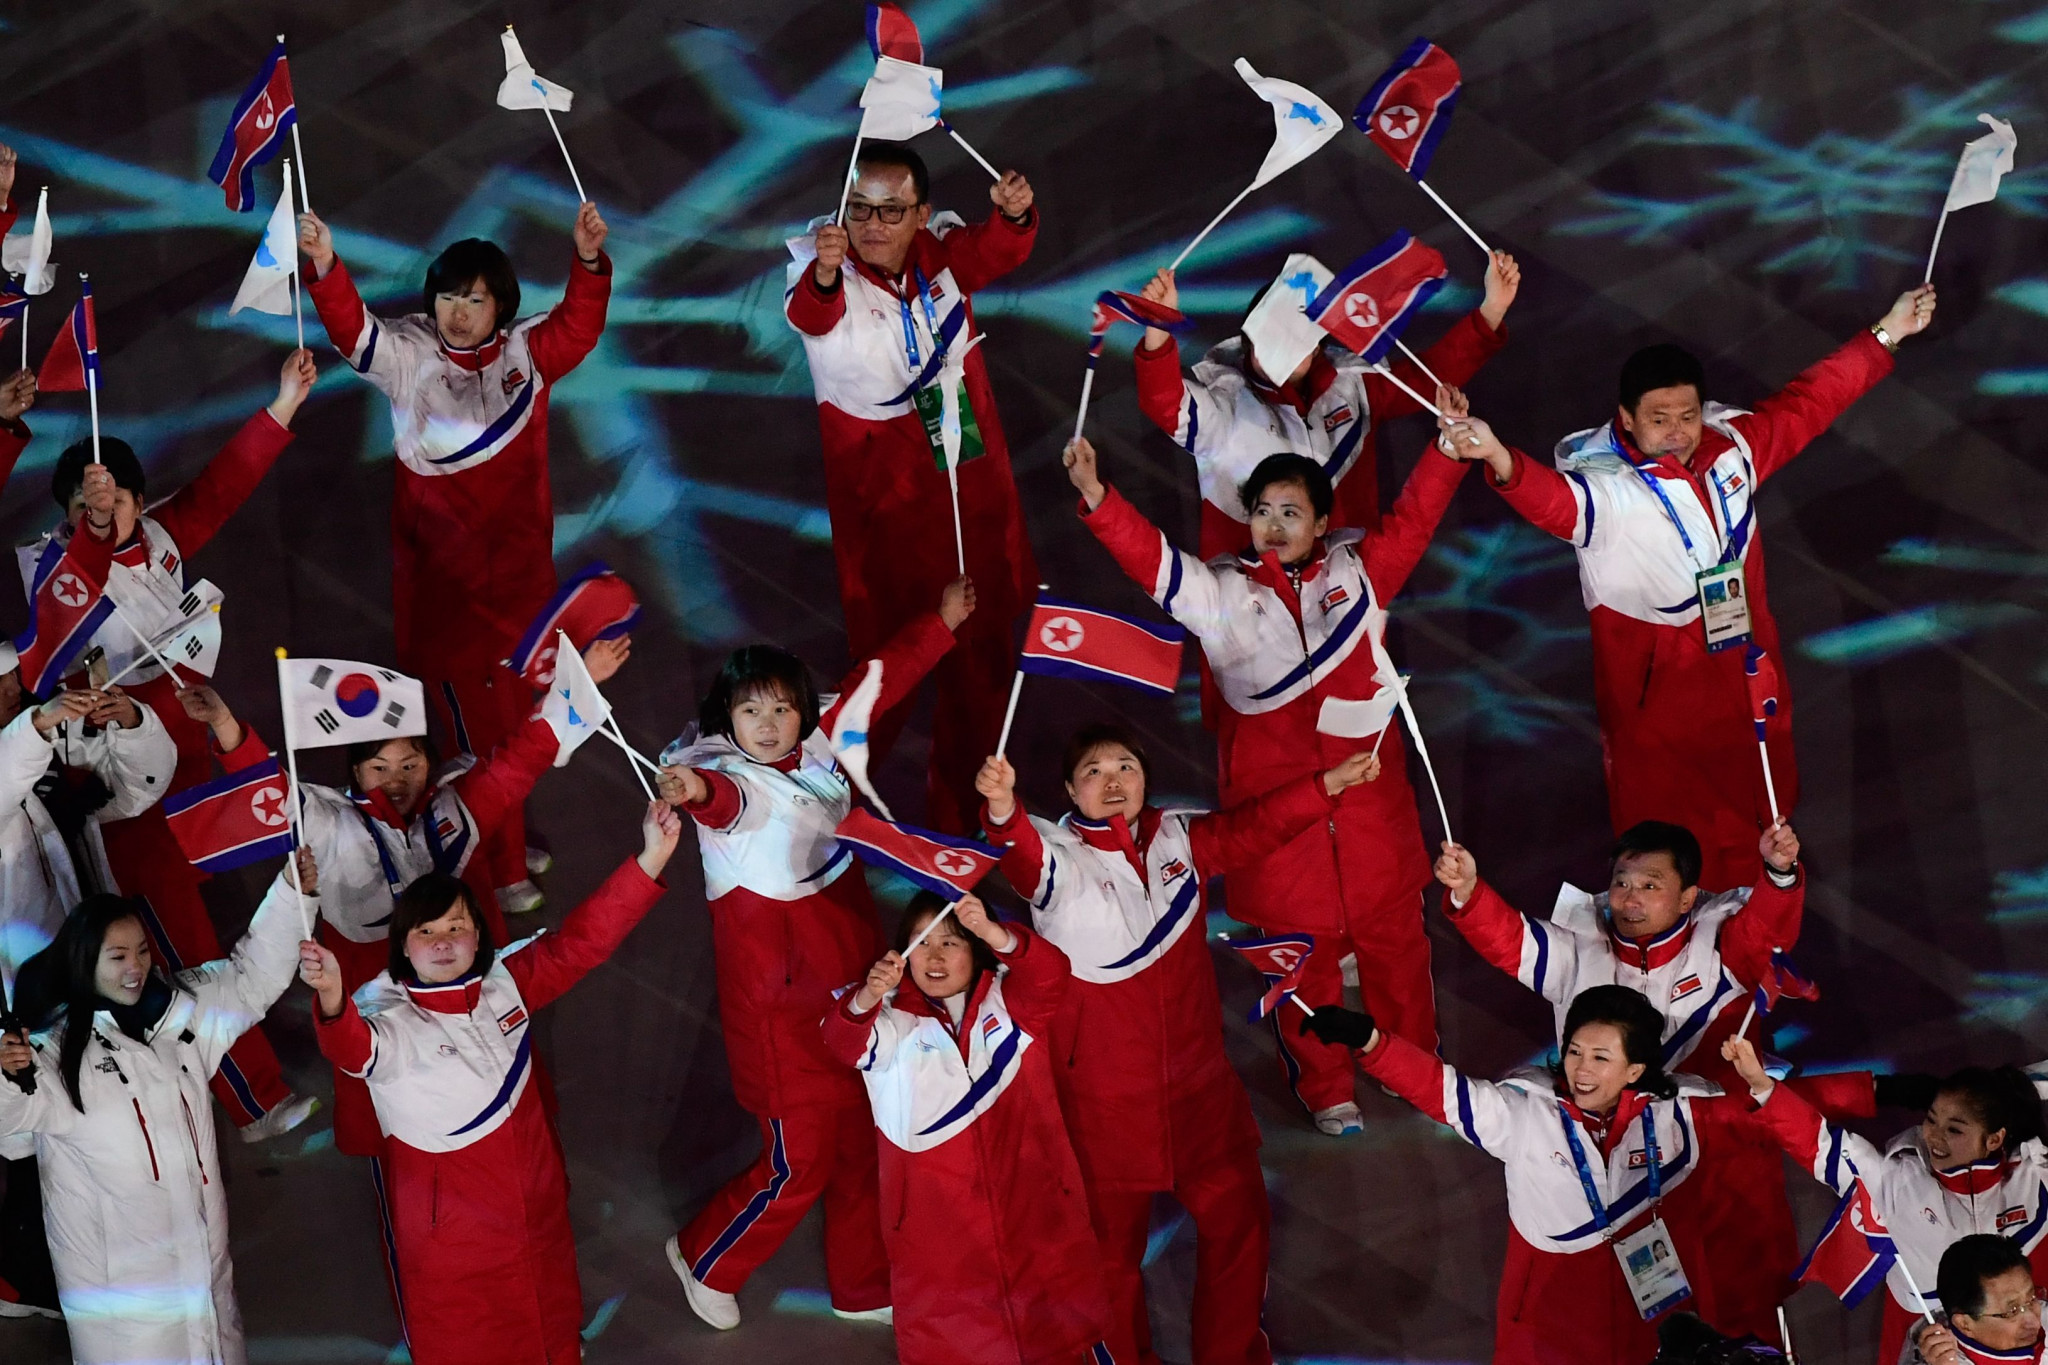 North Korea marched alongside the South at the Closing Ceremony ©Getty Images